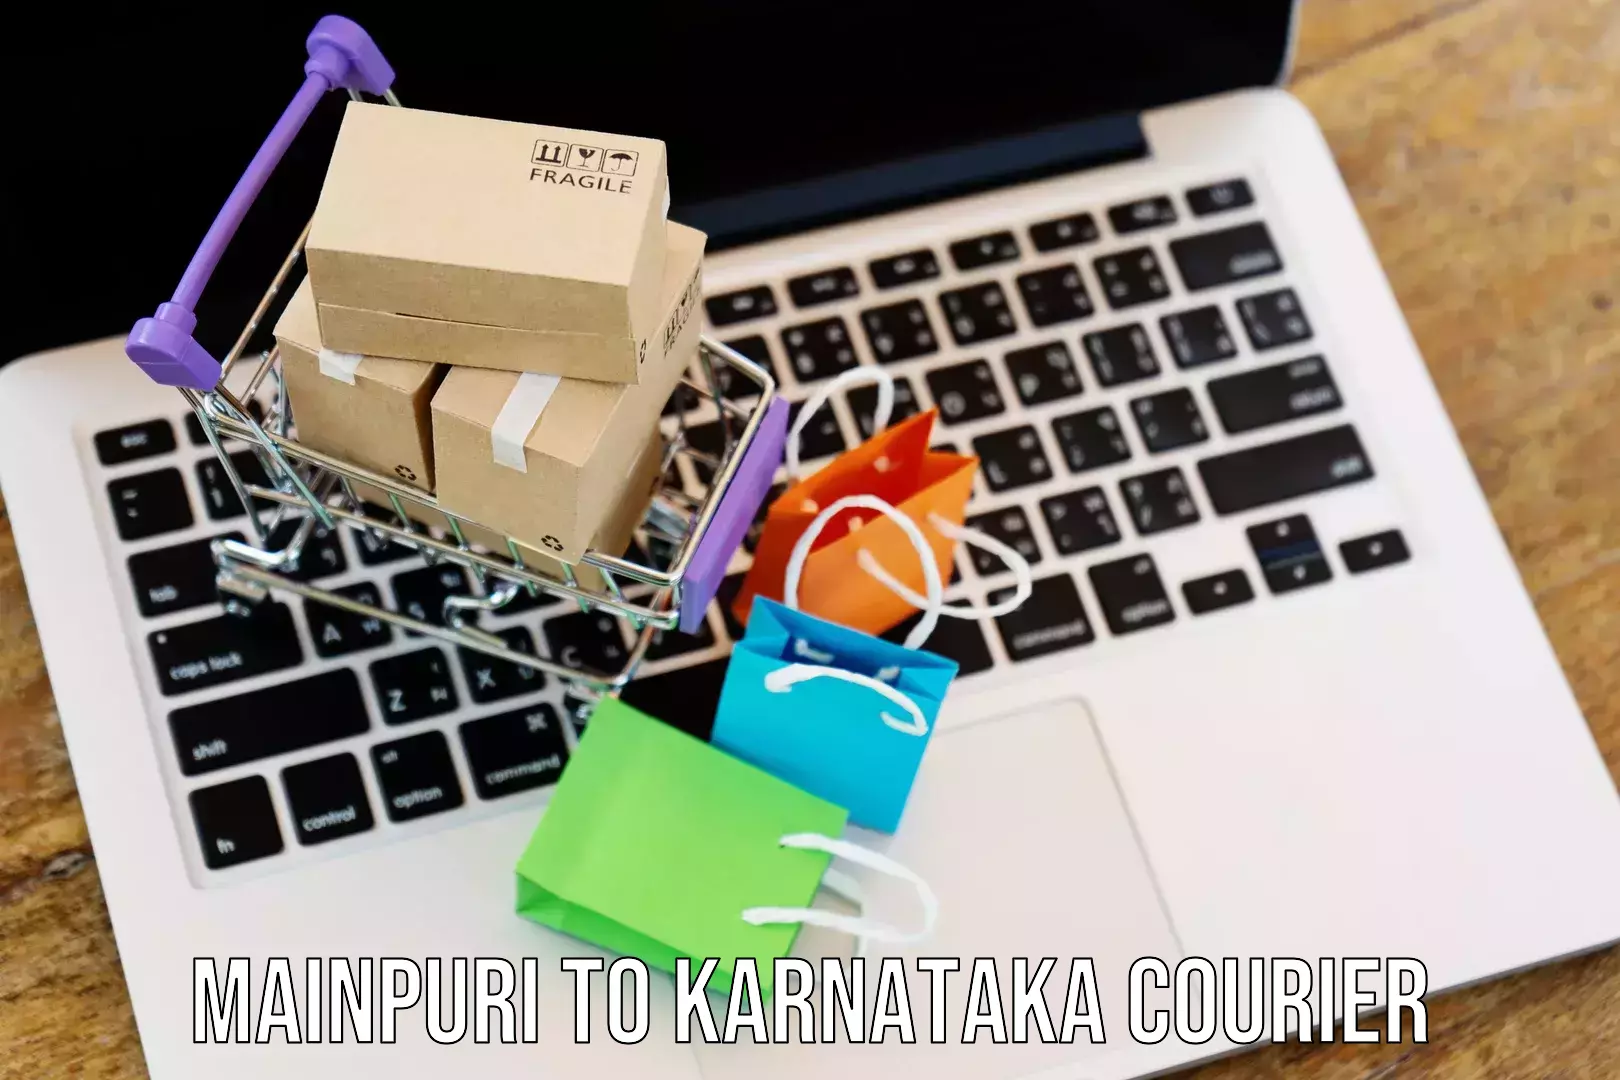 State-of-the-art courier technology Mainpuri to Yaragatti